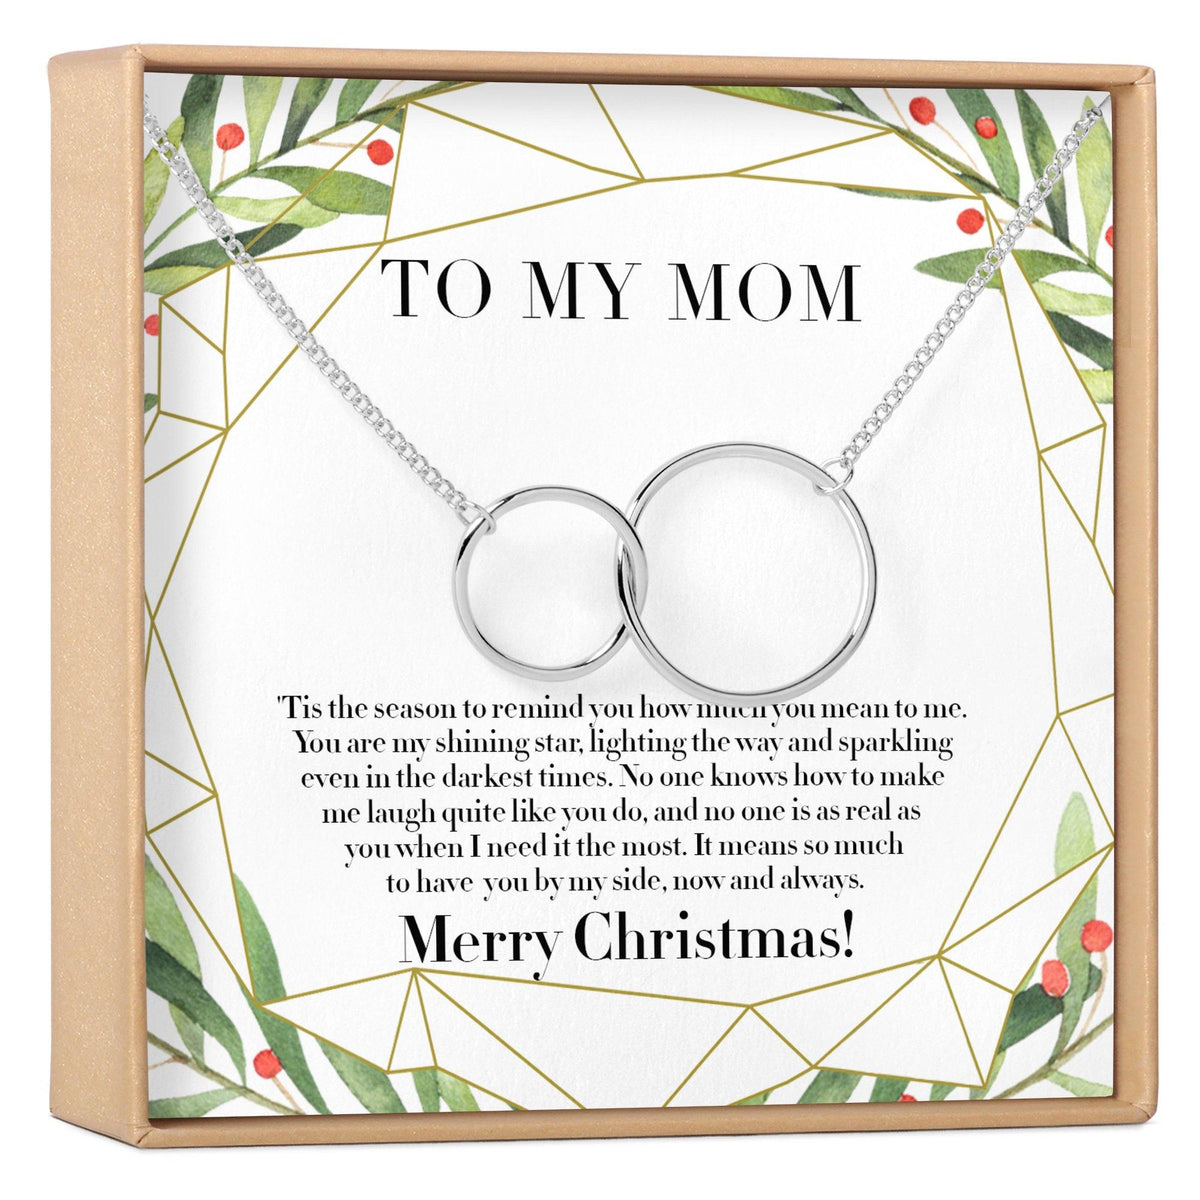 CHRISTMAS GIFT IDEAS FOR YOUR MOM - YouTube